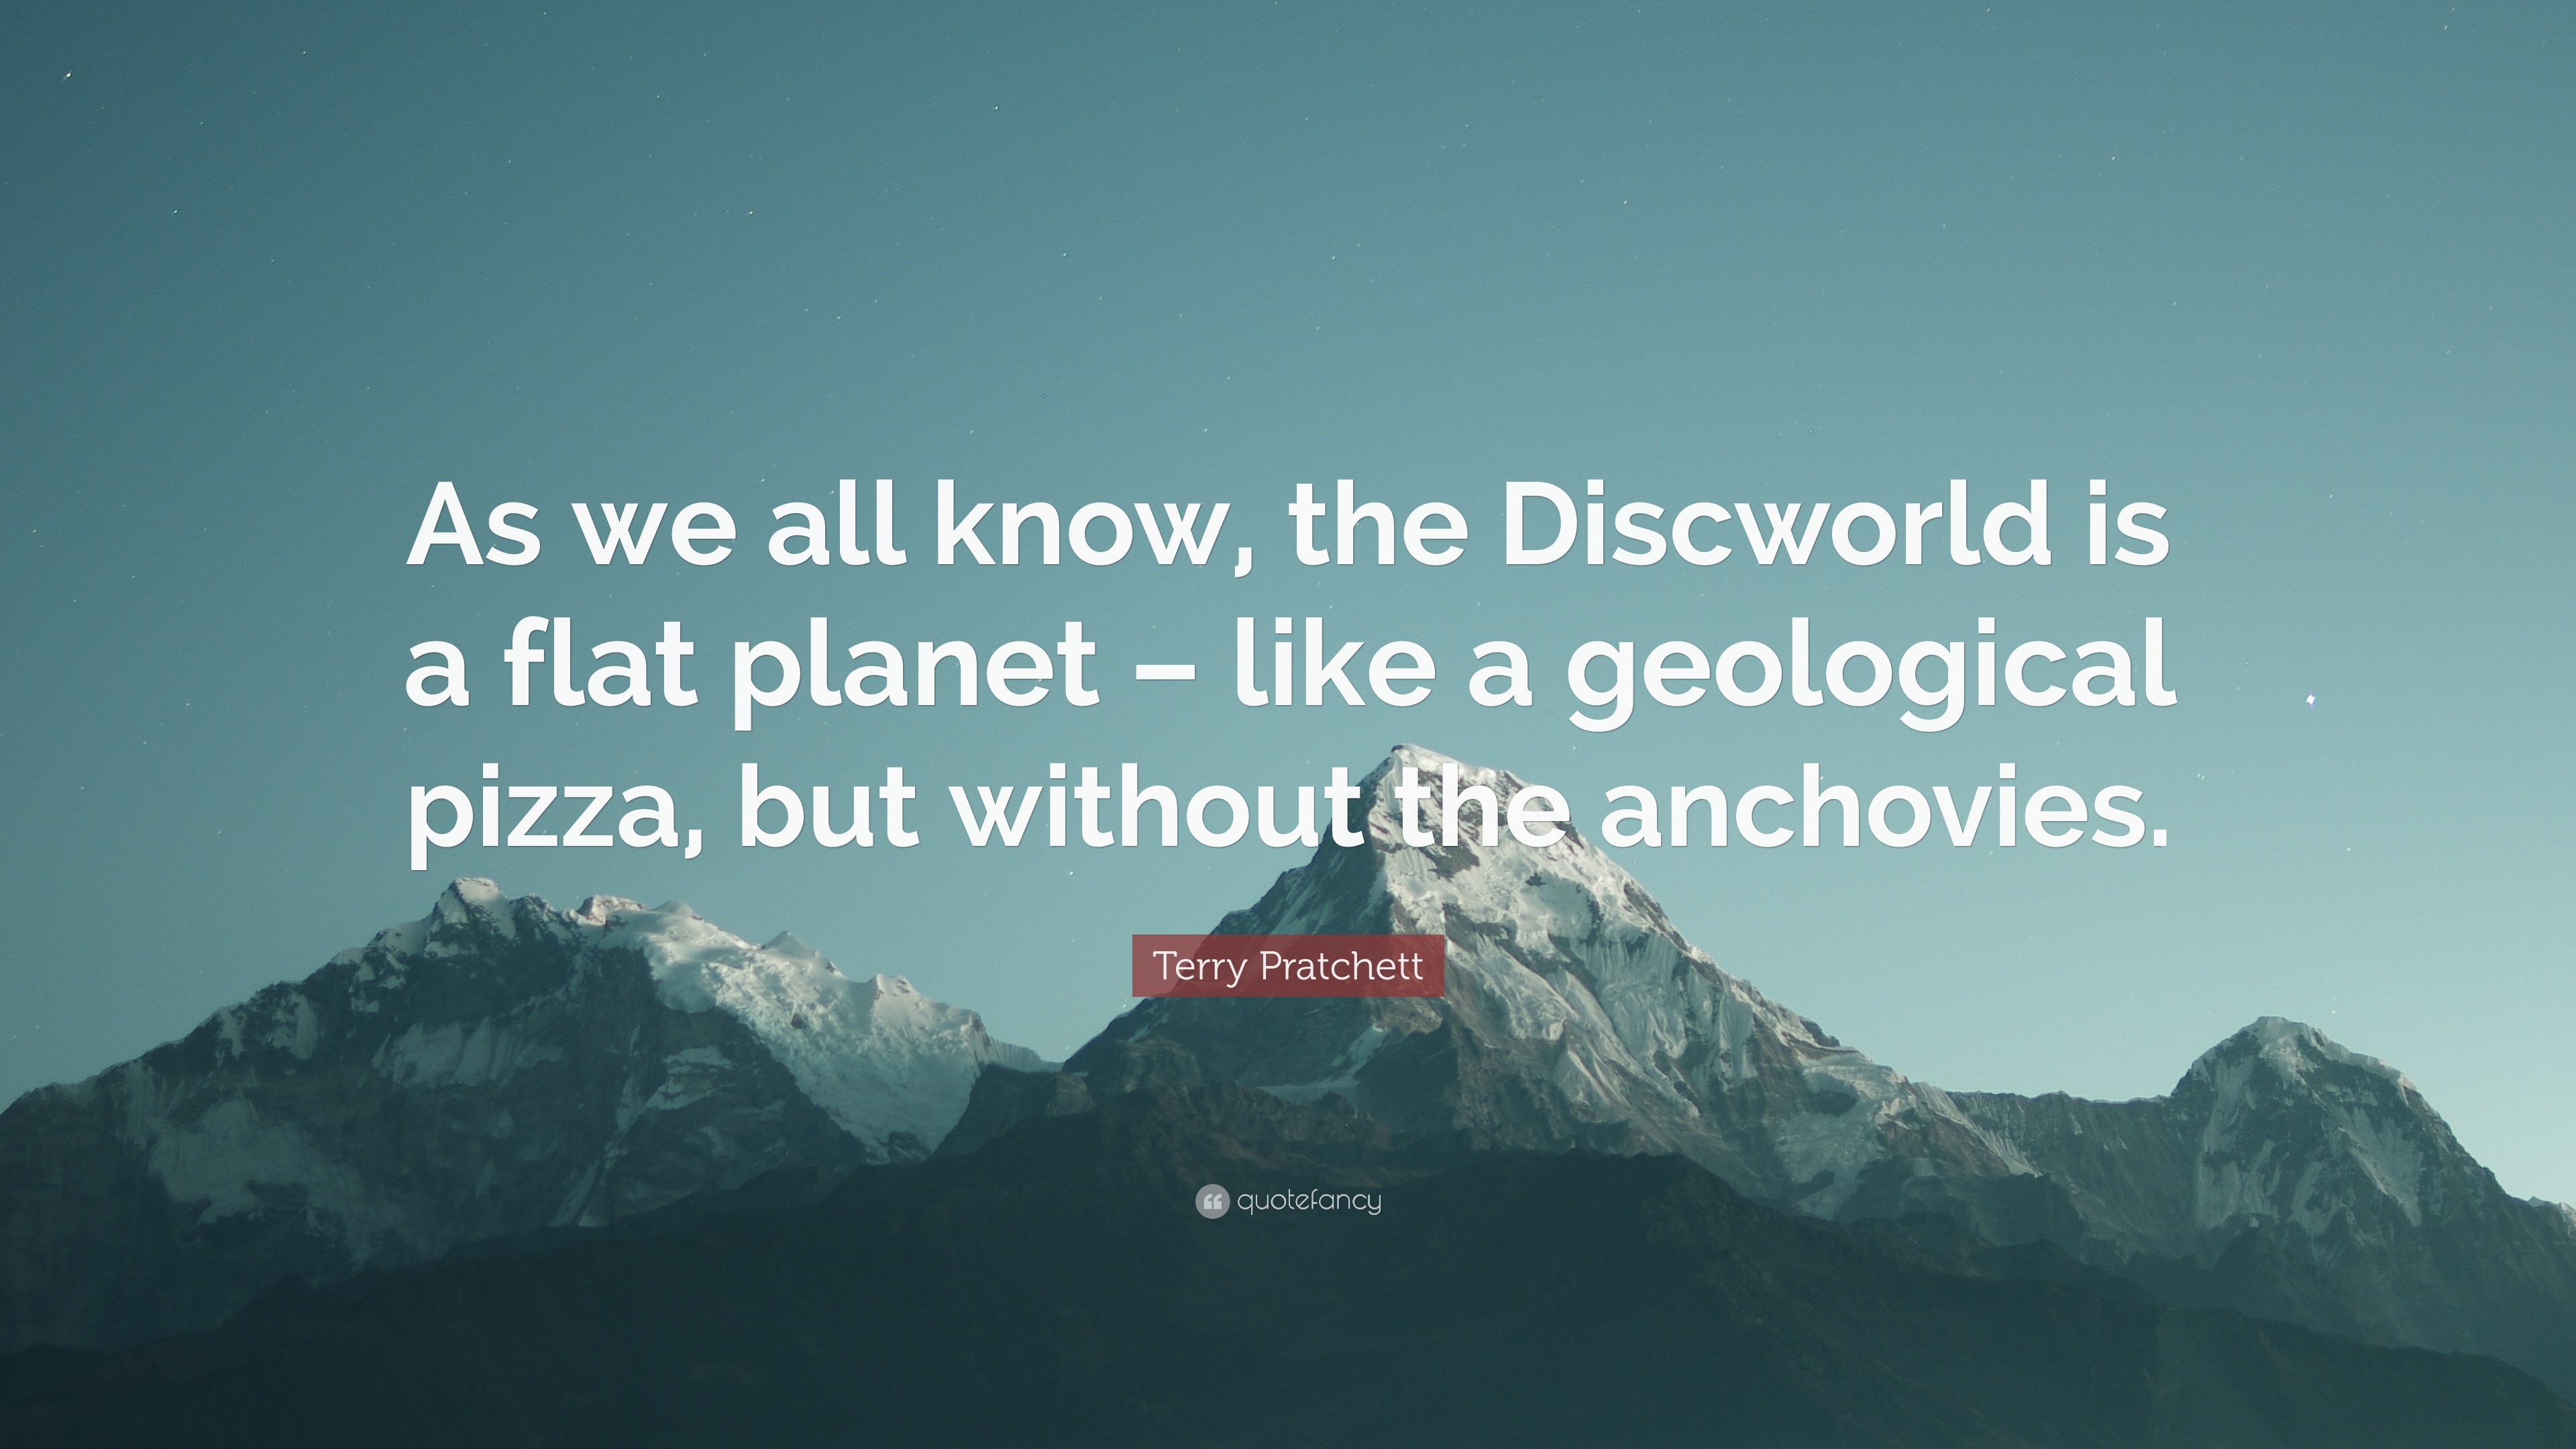 Terry Pratchett Quote: “As we all know, the Discworld is a flat planet –  like a geological